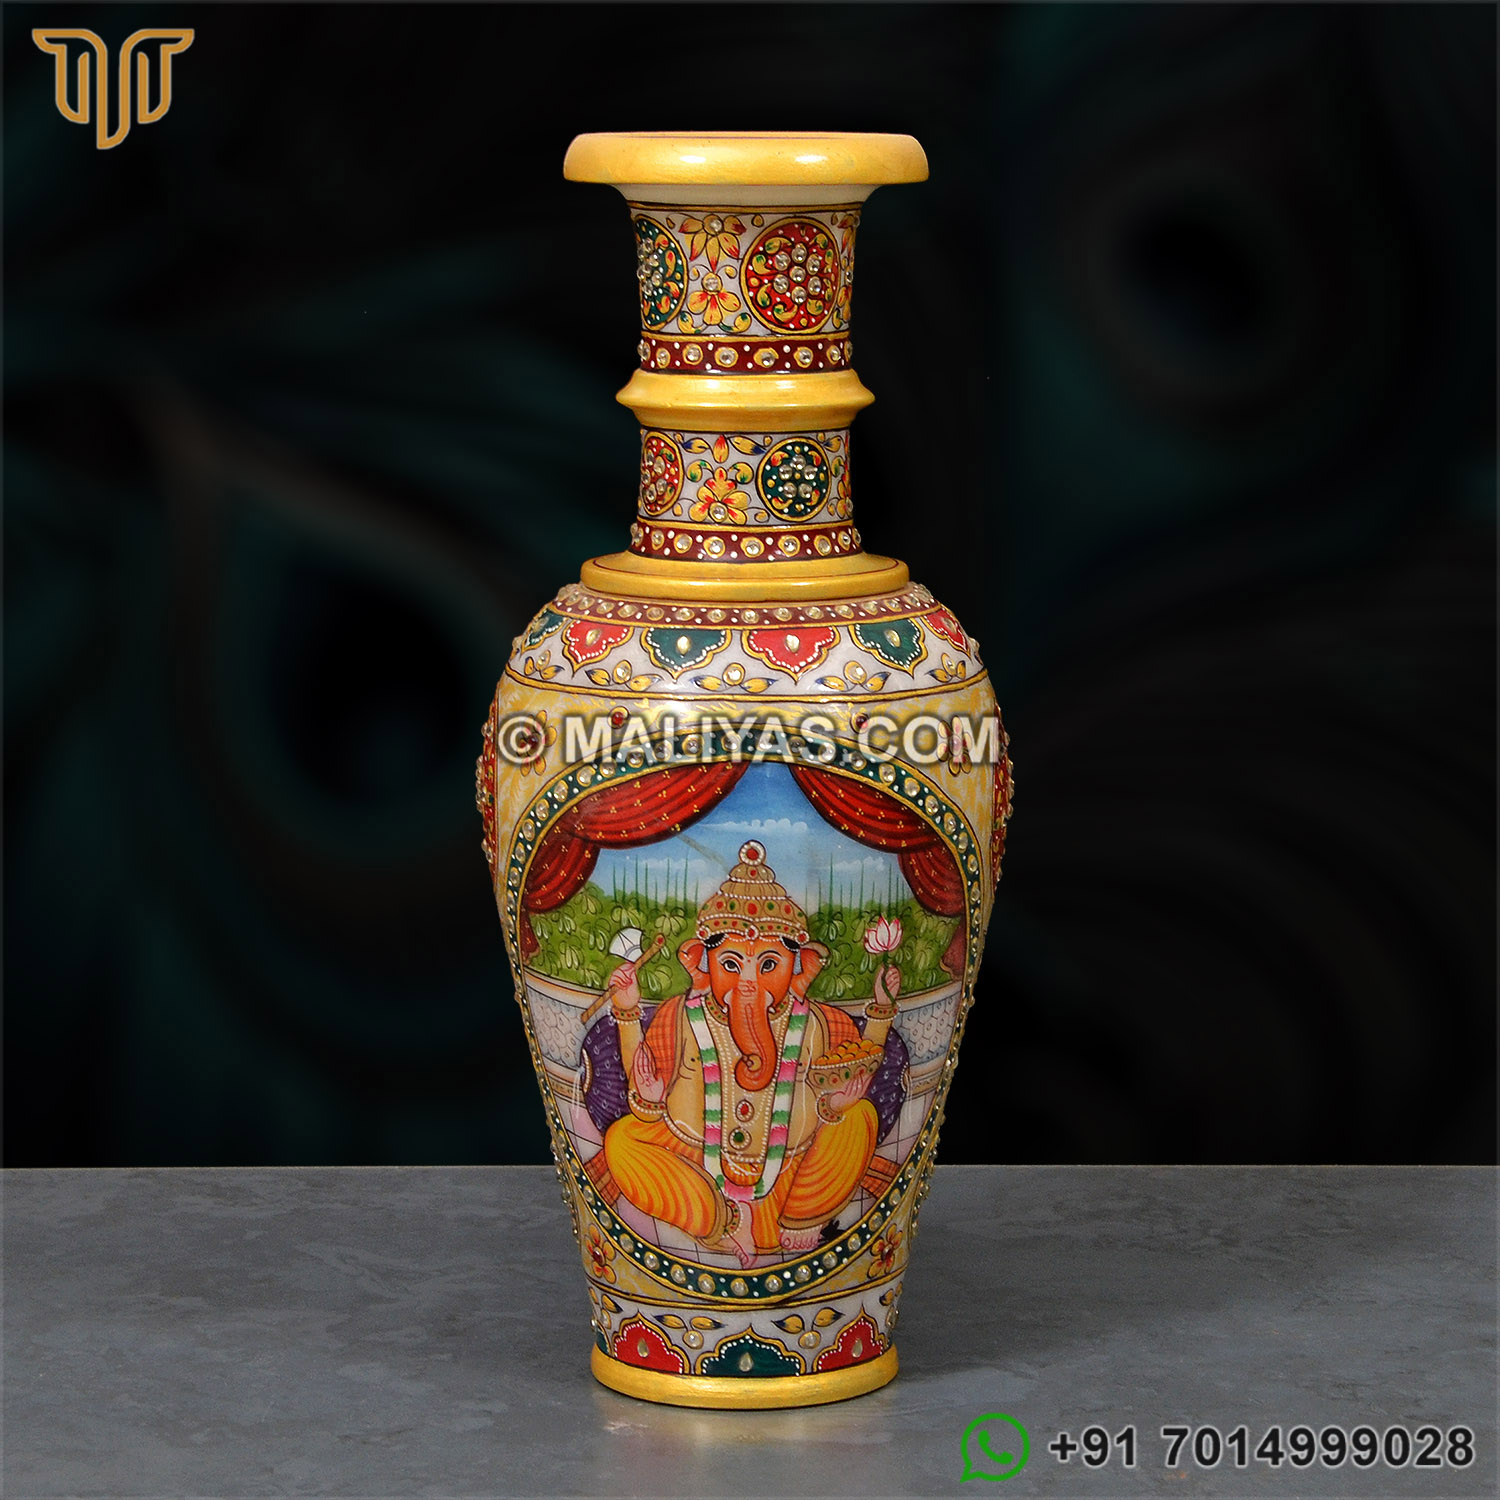 Marble Flower Vase with Ganesh Painting